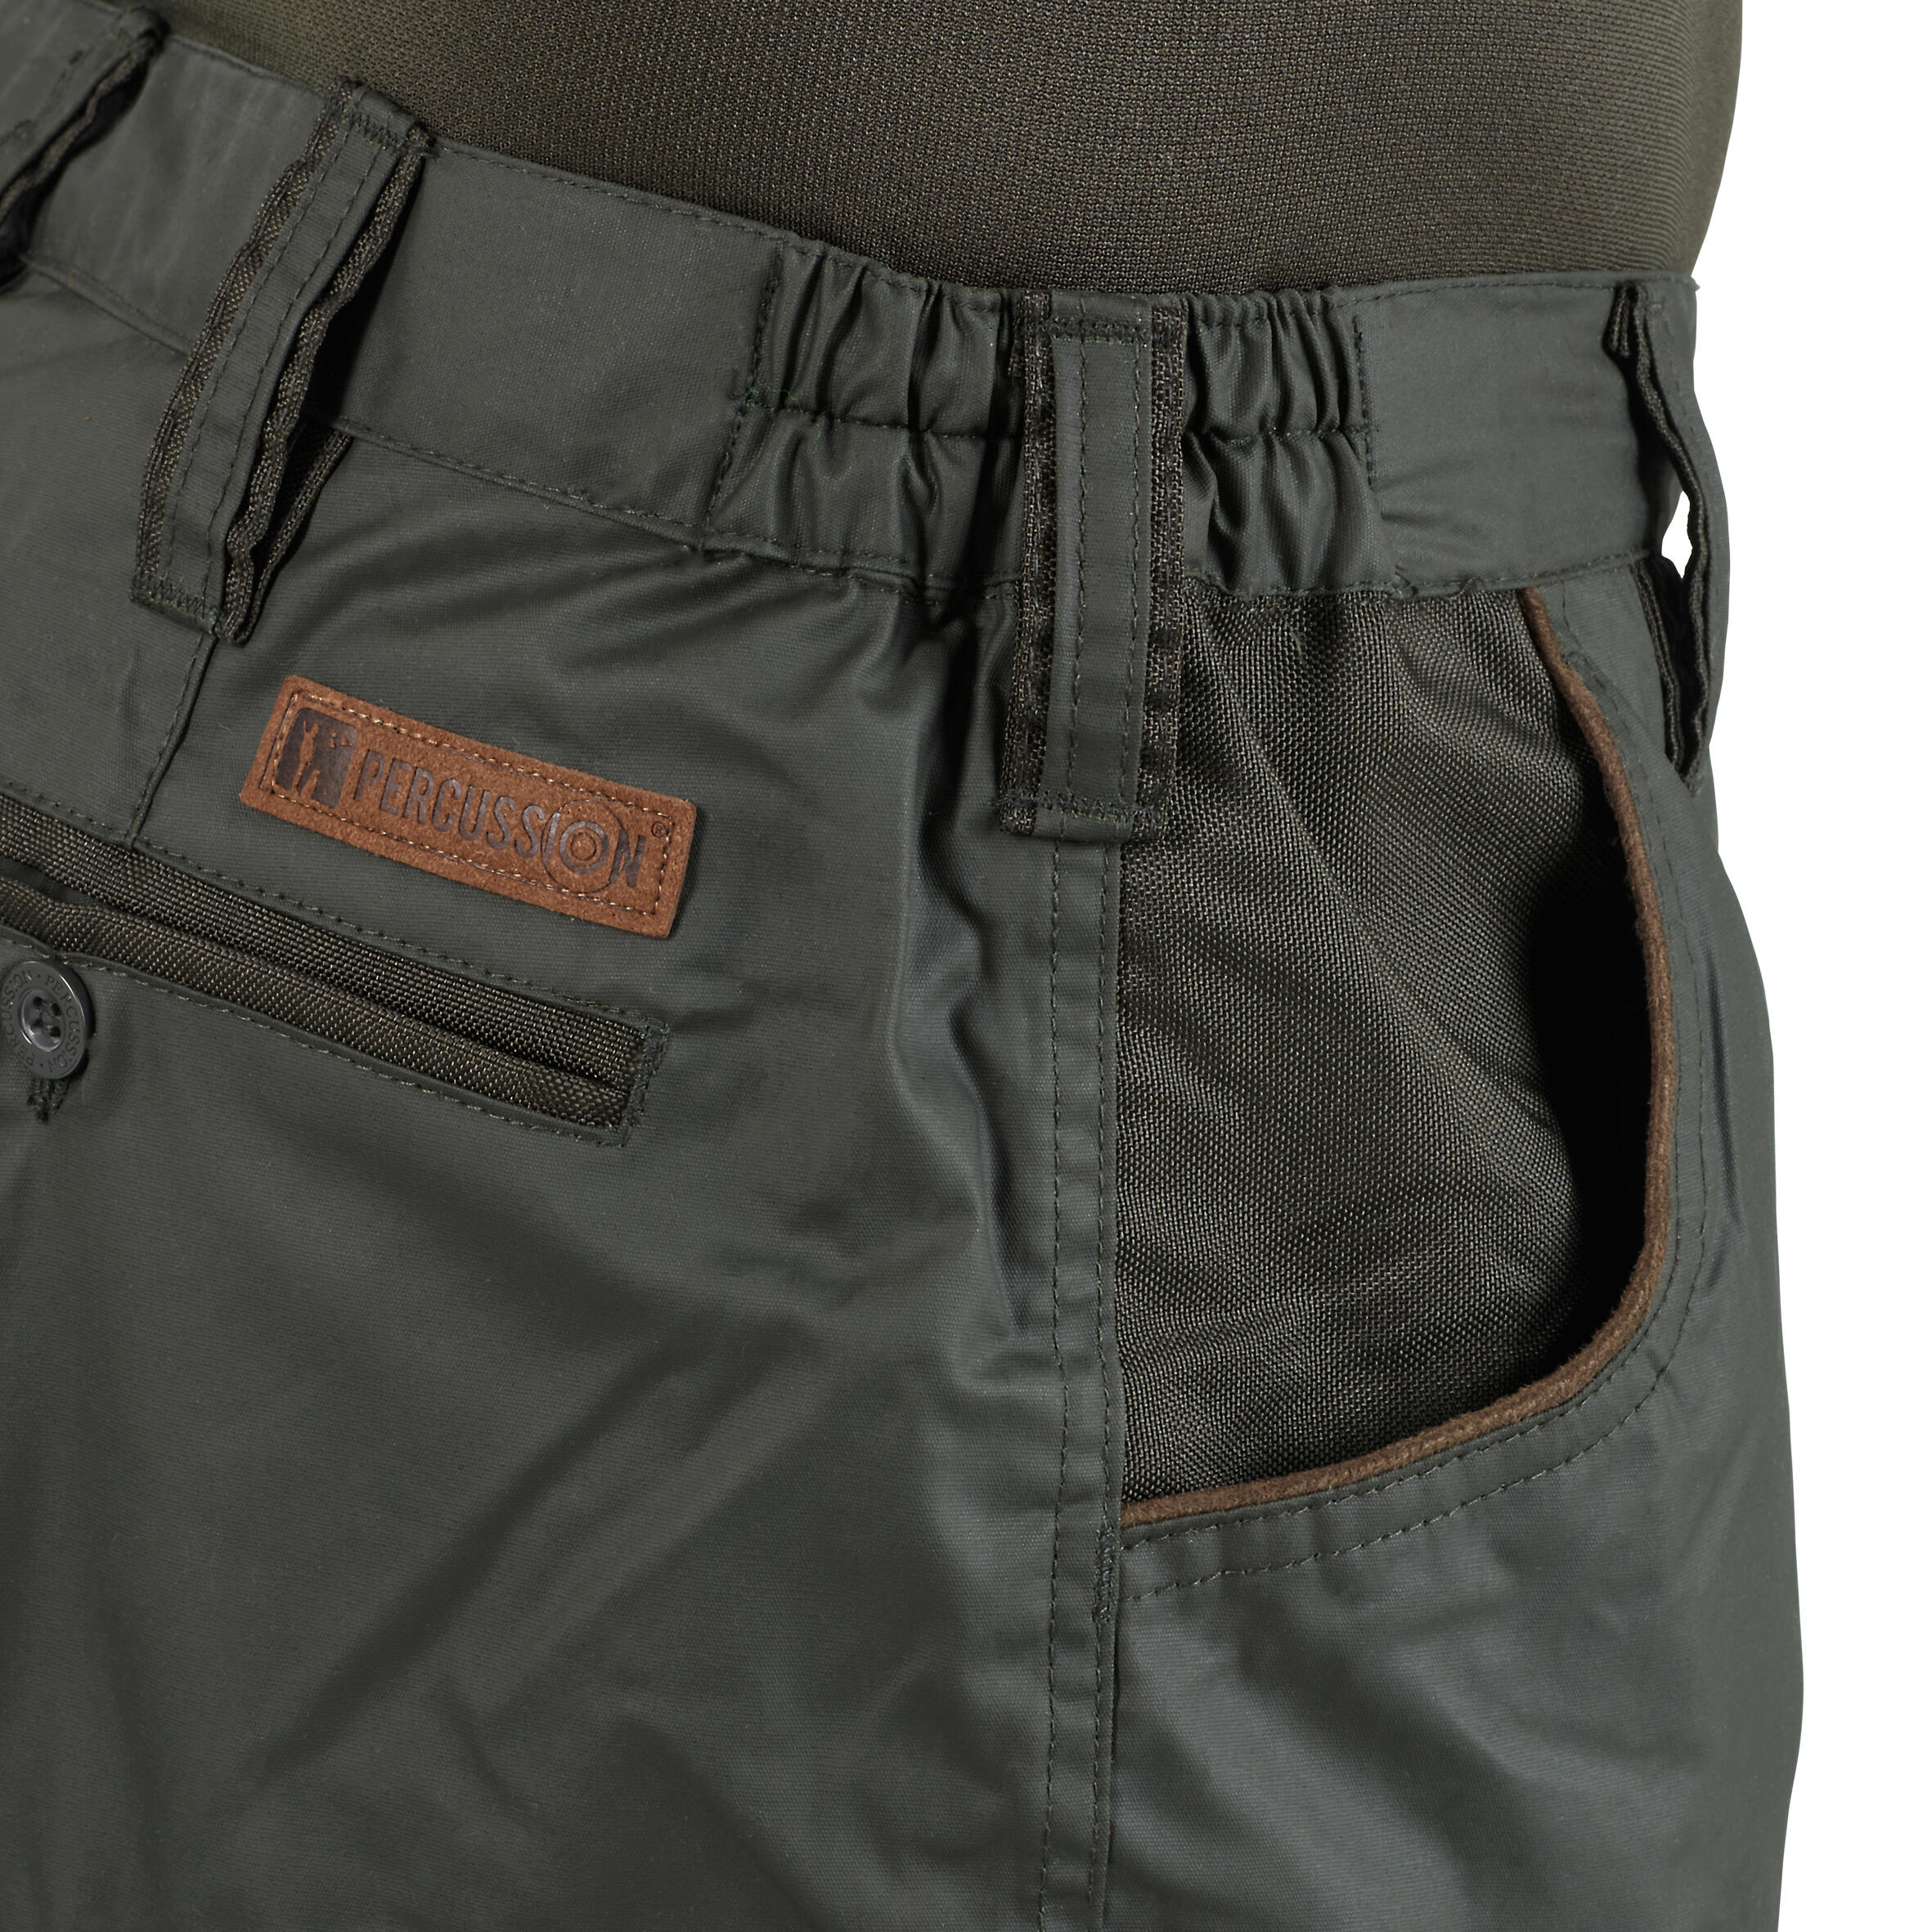 Impertane Tapered Country Sport Trousers - Green 10/14